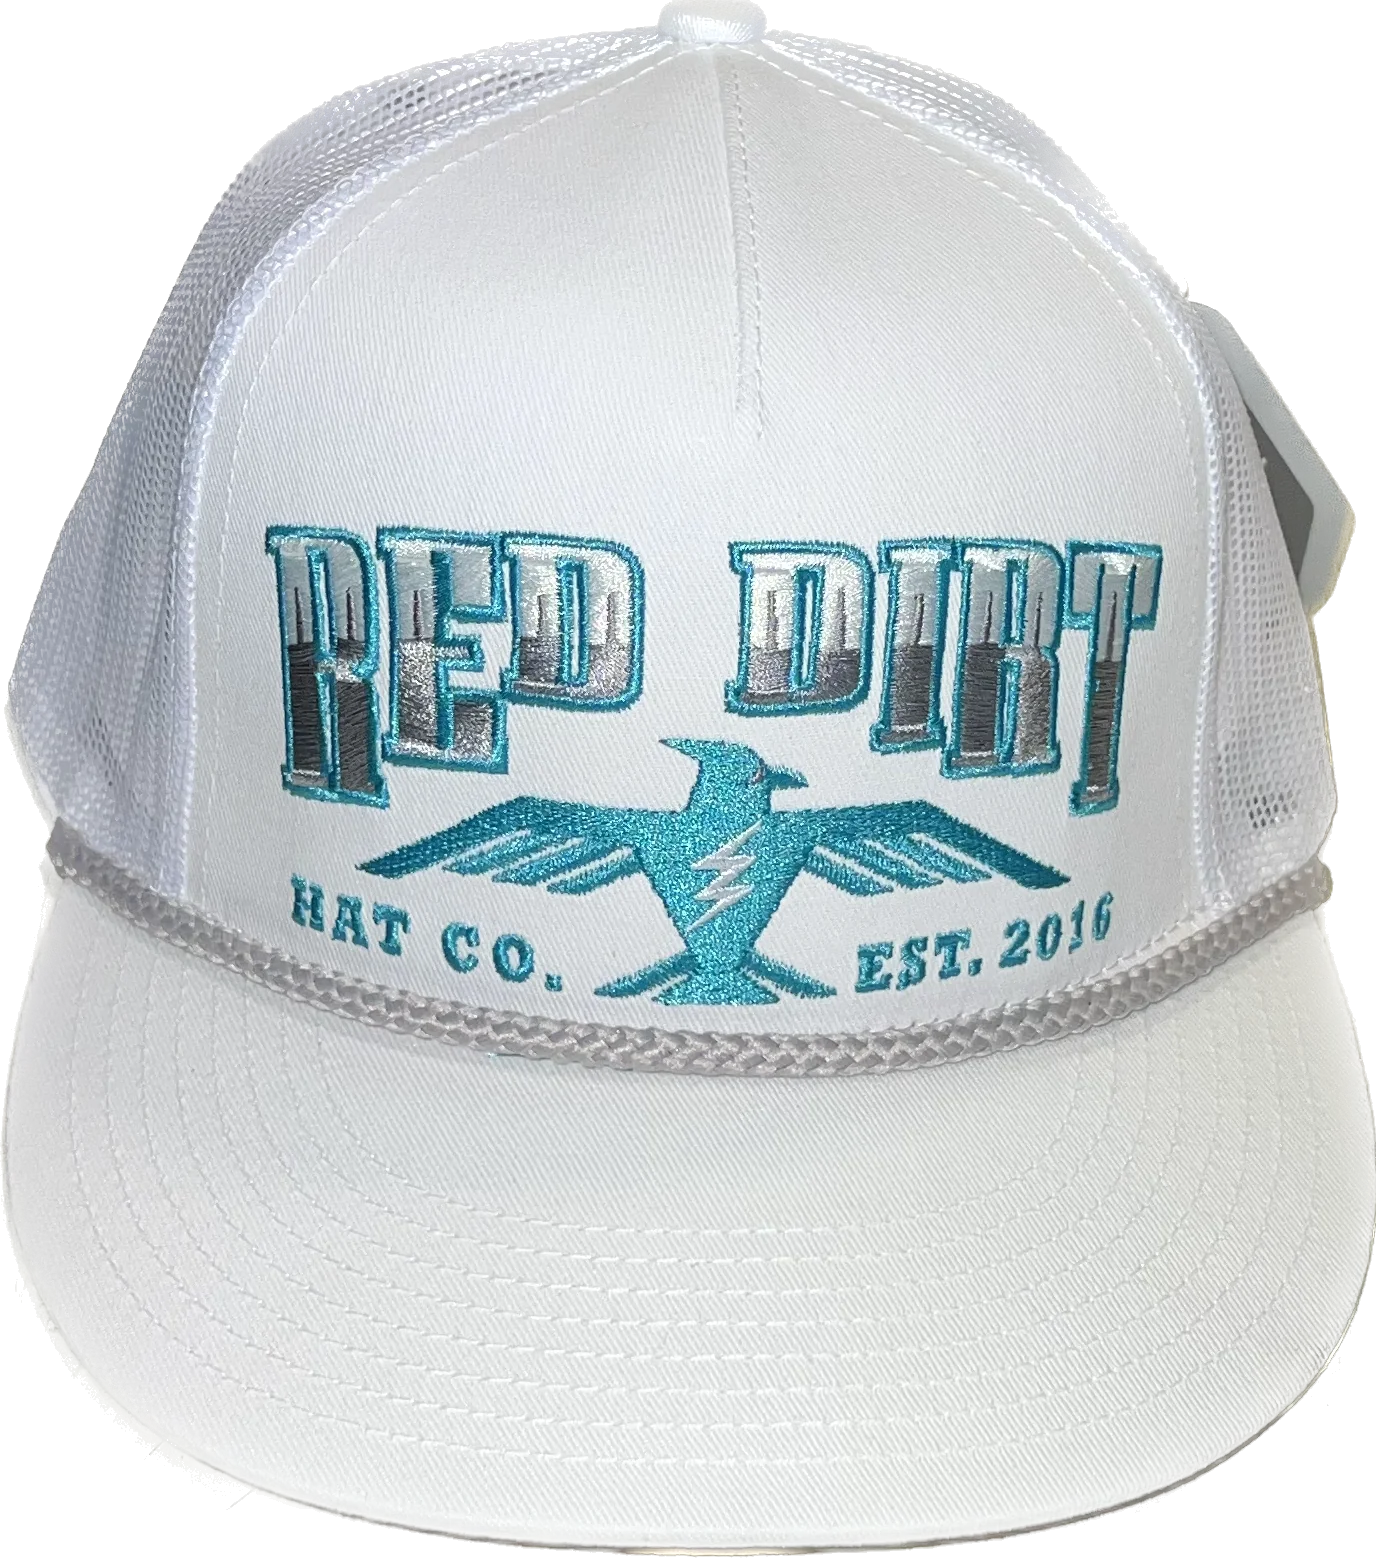 RED DIRT HAT CO WATCH ME FLY CAP in WHITE